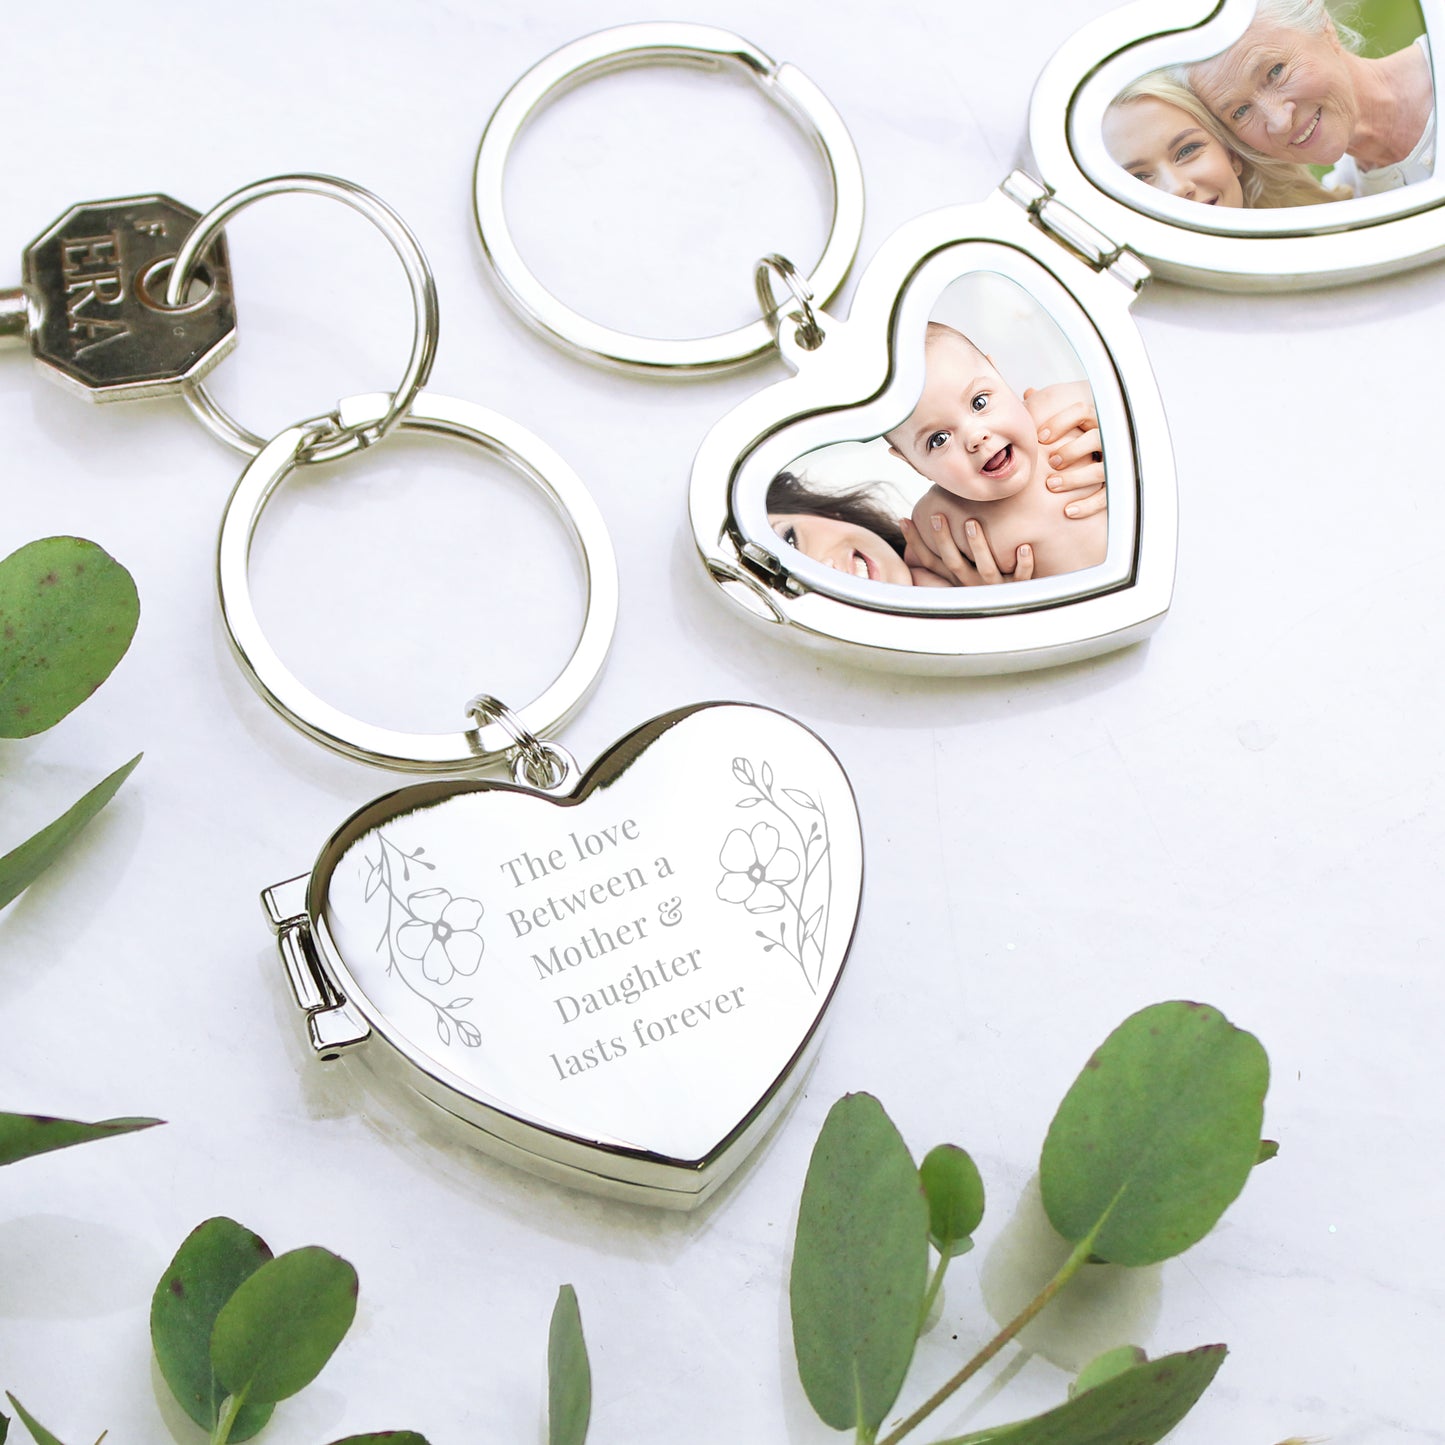 Personalised Floral Heart Photo Frame Keyring